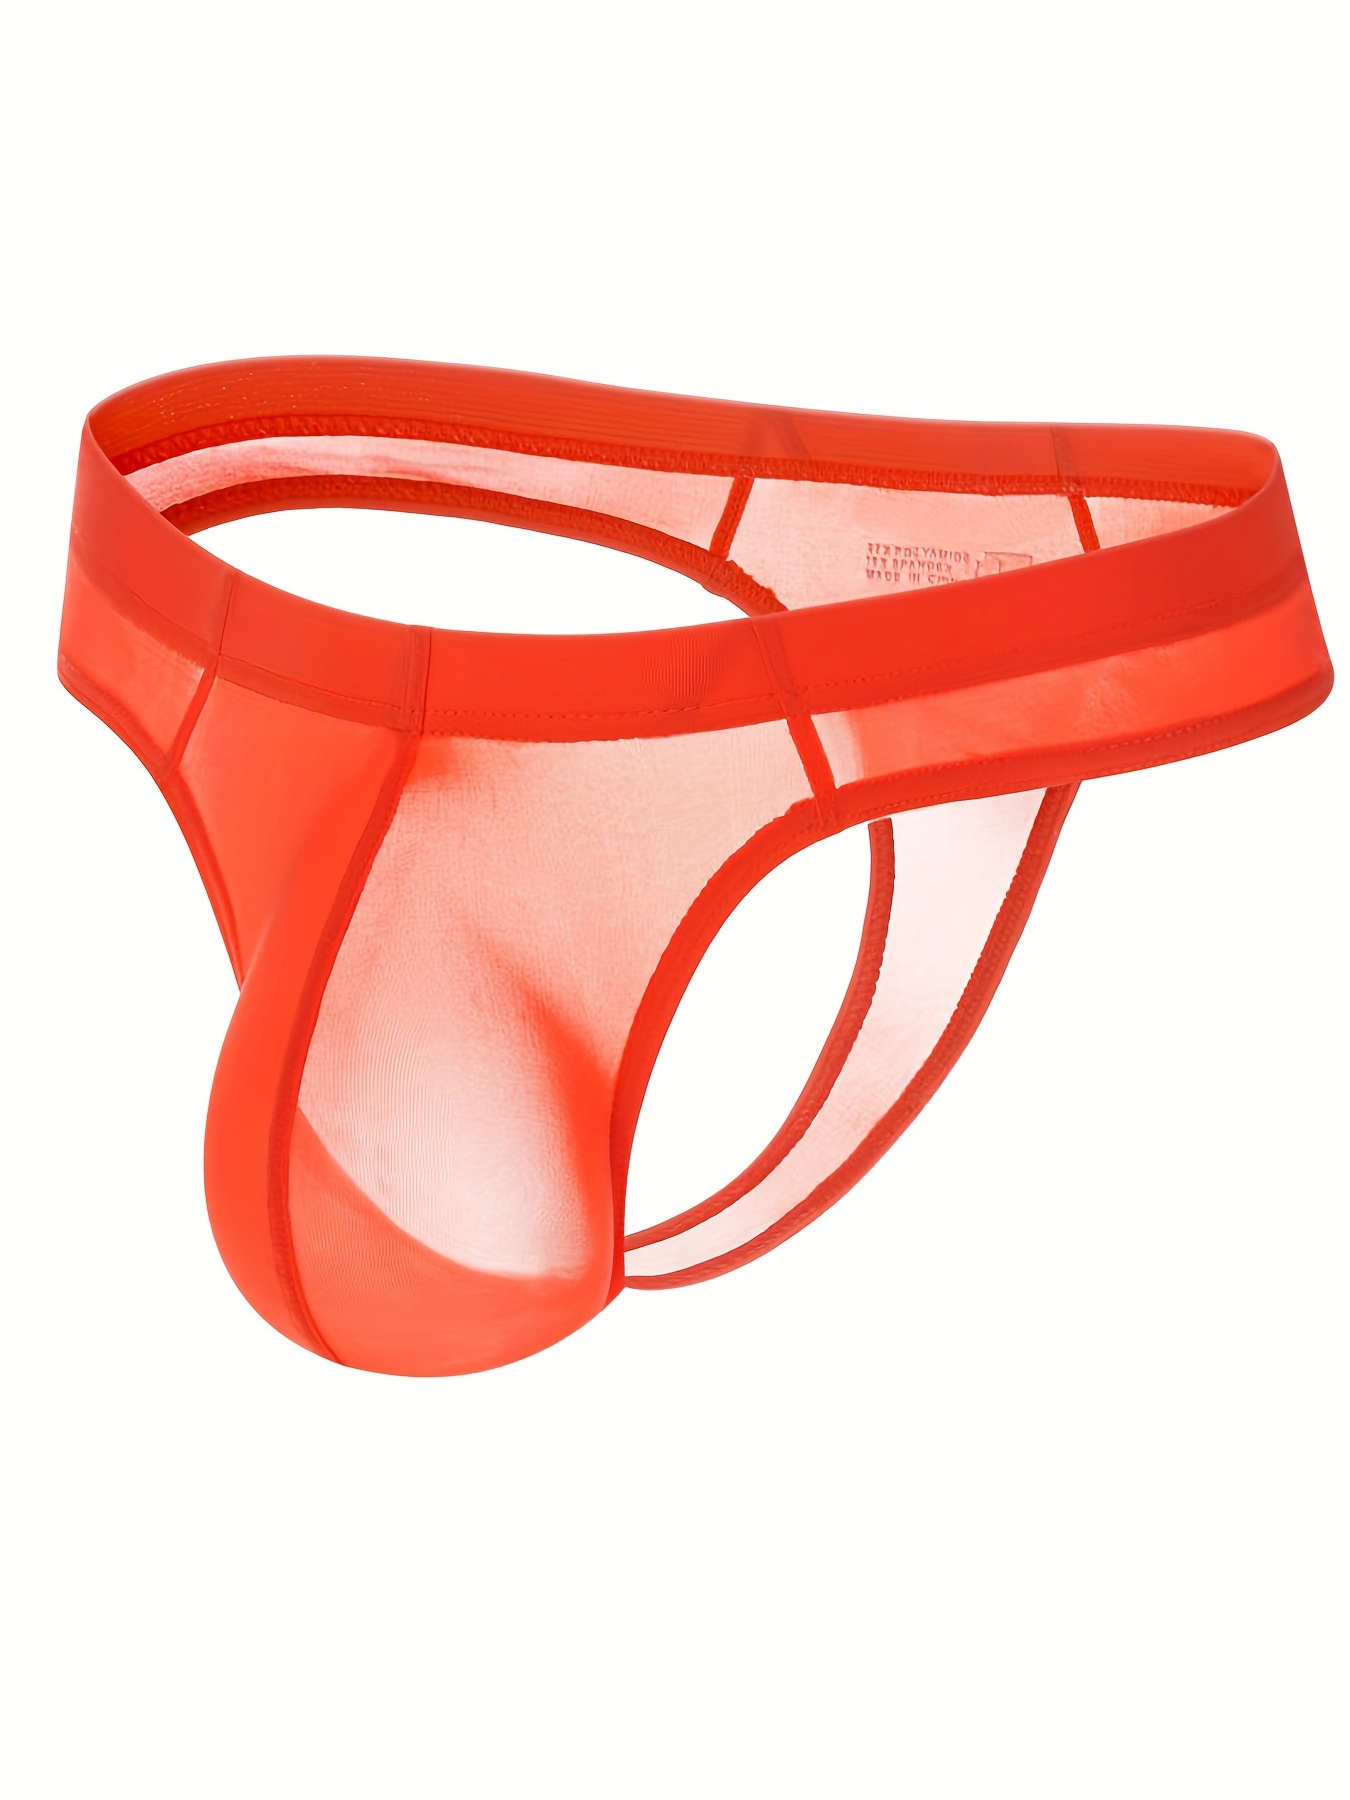 Shop Men's Thong Swimsuits: Find Your Perfect Fit – Bodywear for Men